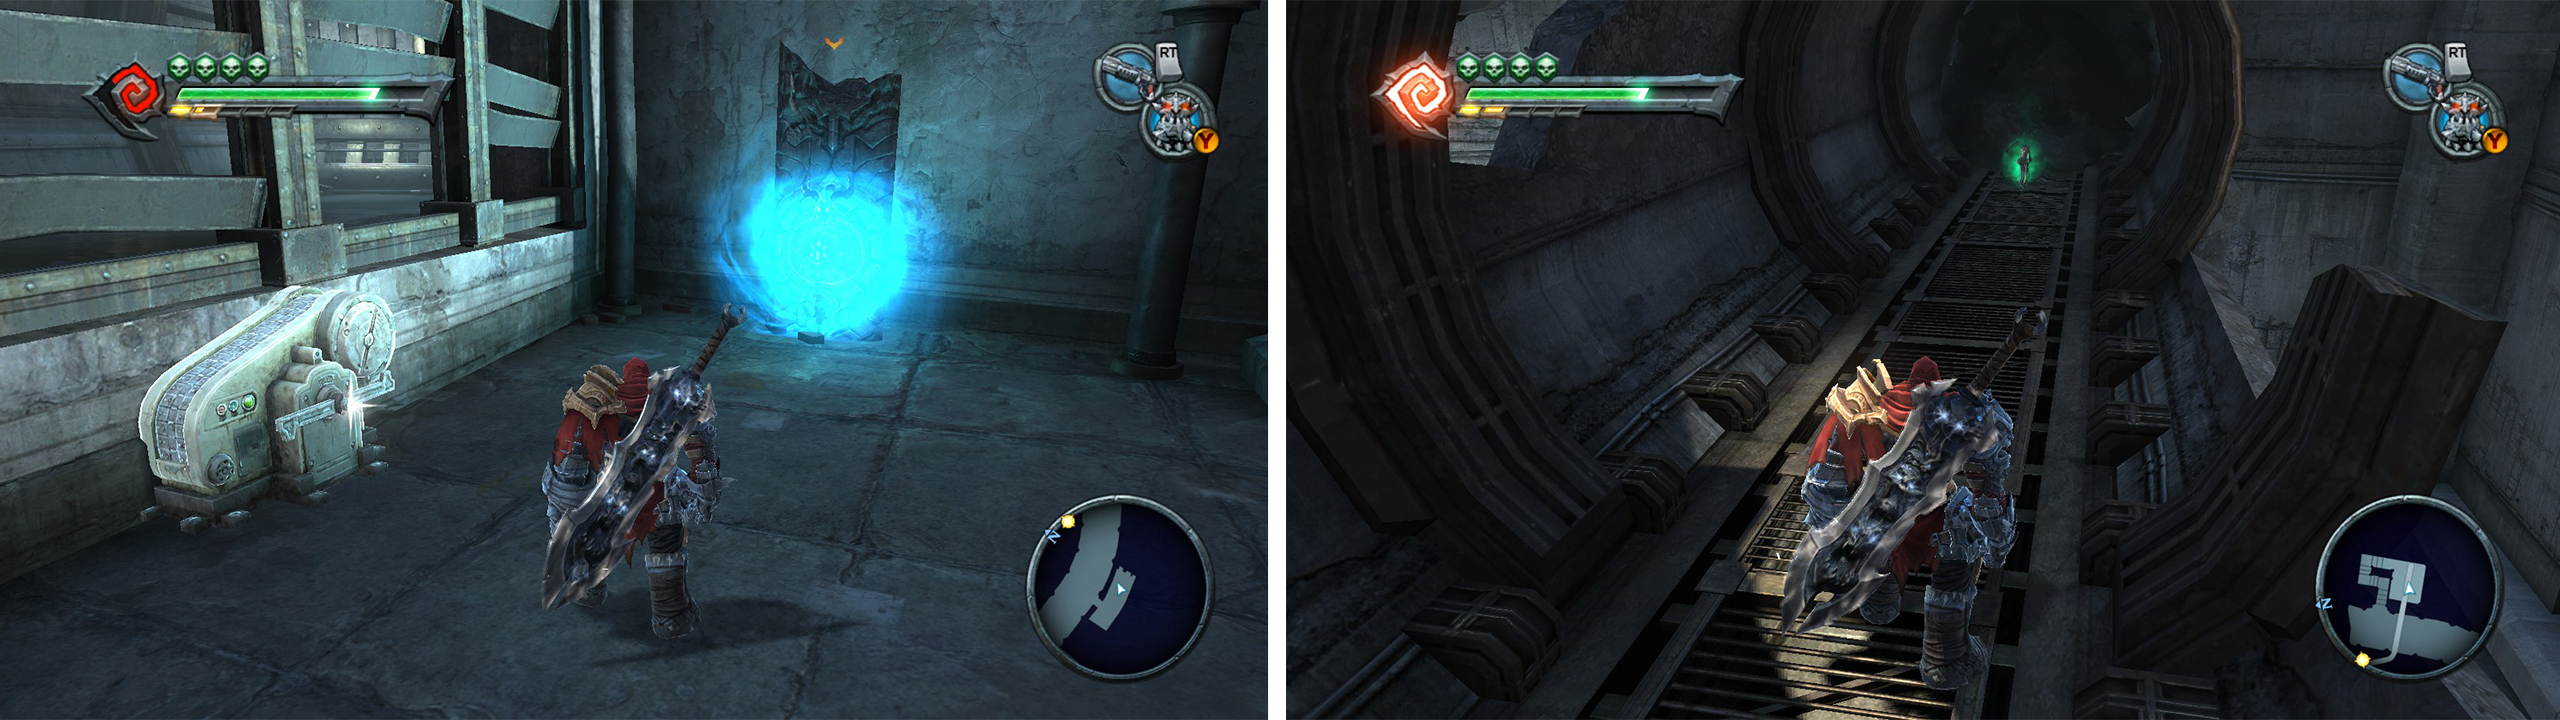 Use the Chronosphere (left) to get through the gate in the tunnel. When you reach the pipe area, look in the dead end for an Artefact (right)